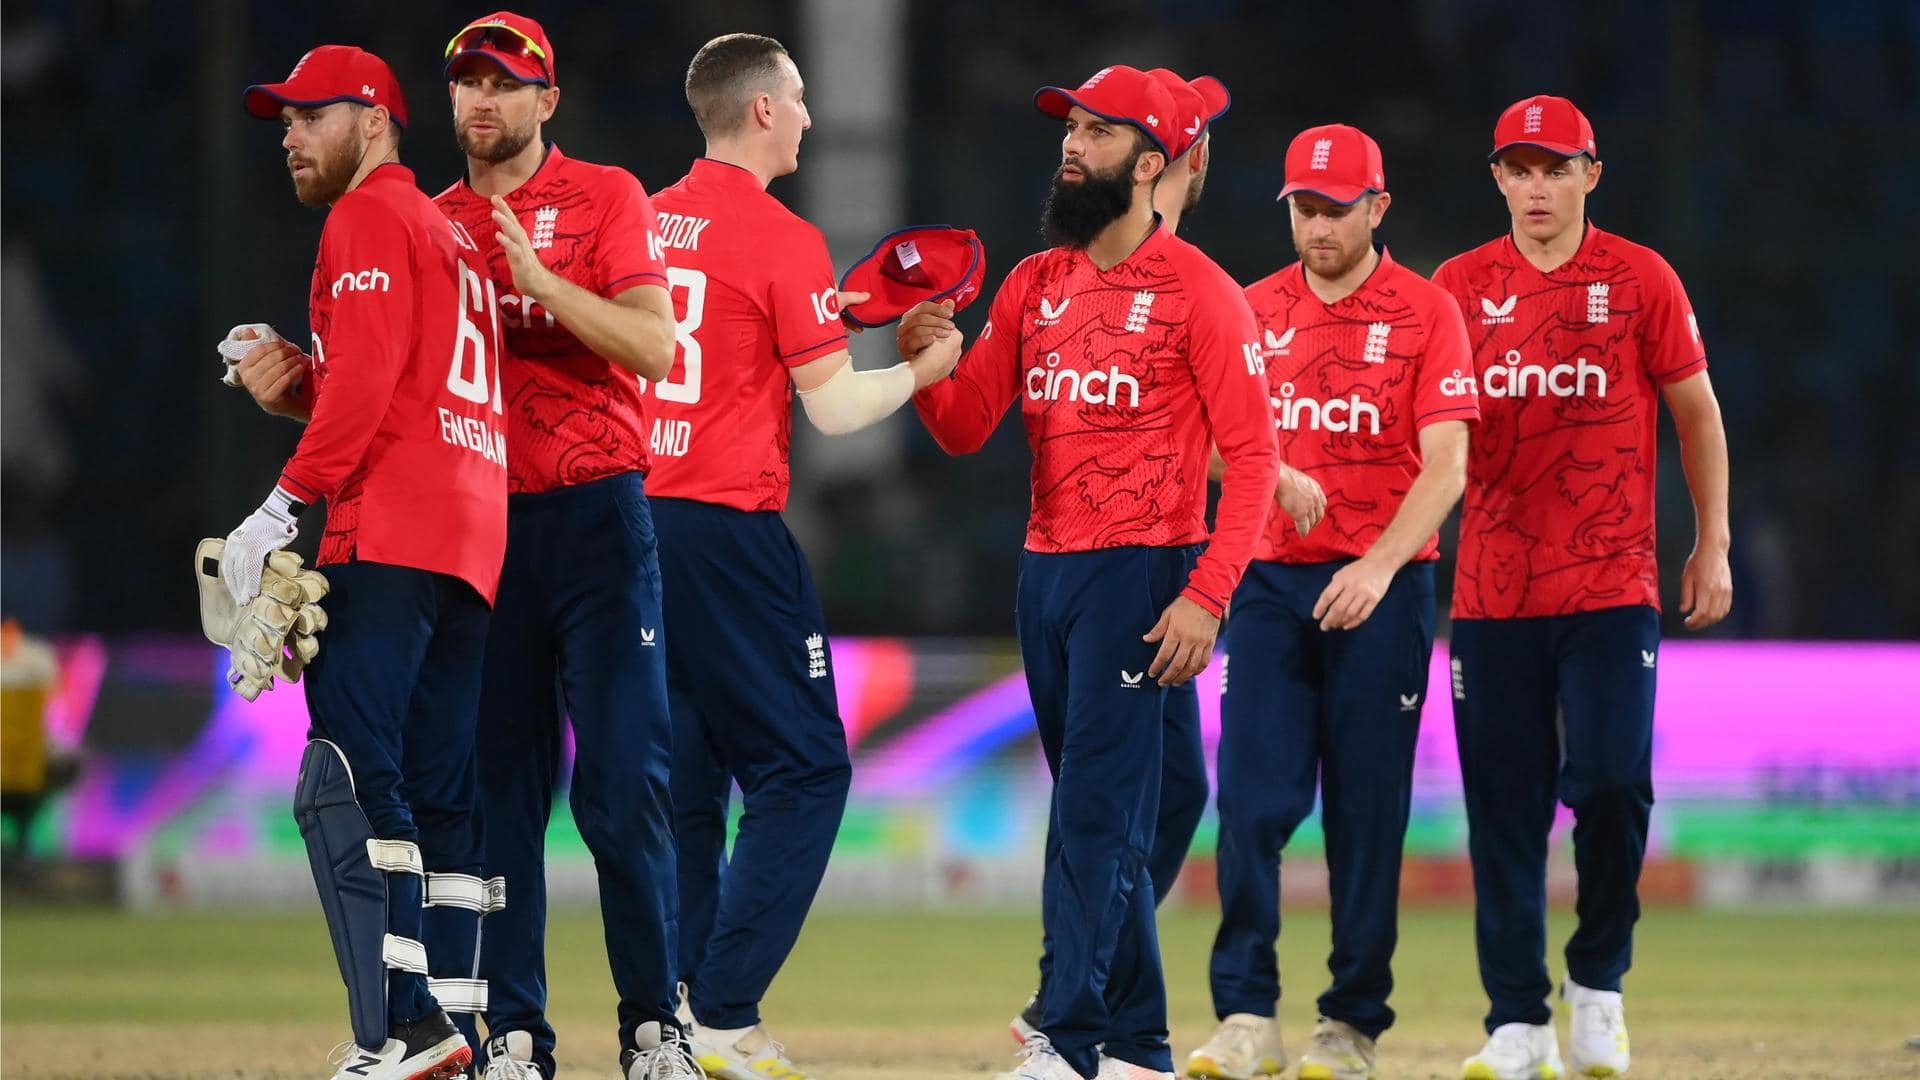 Bangladesh vs England, ODI series: Here is the statistical preview